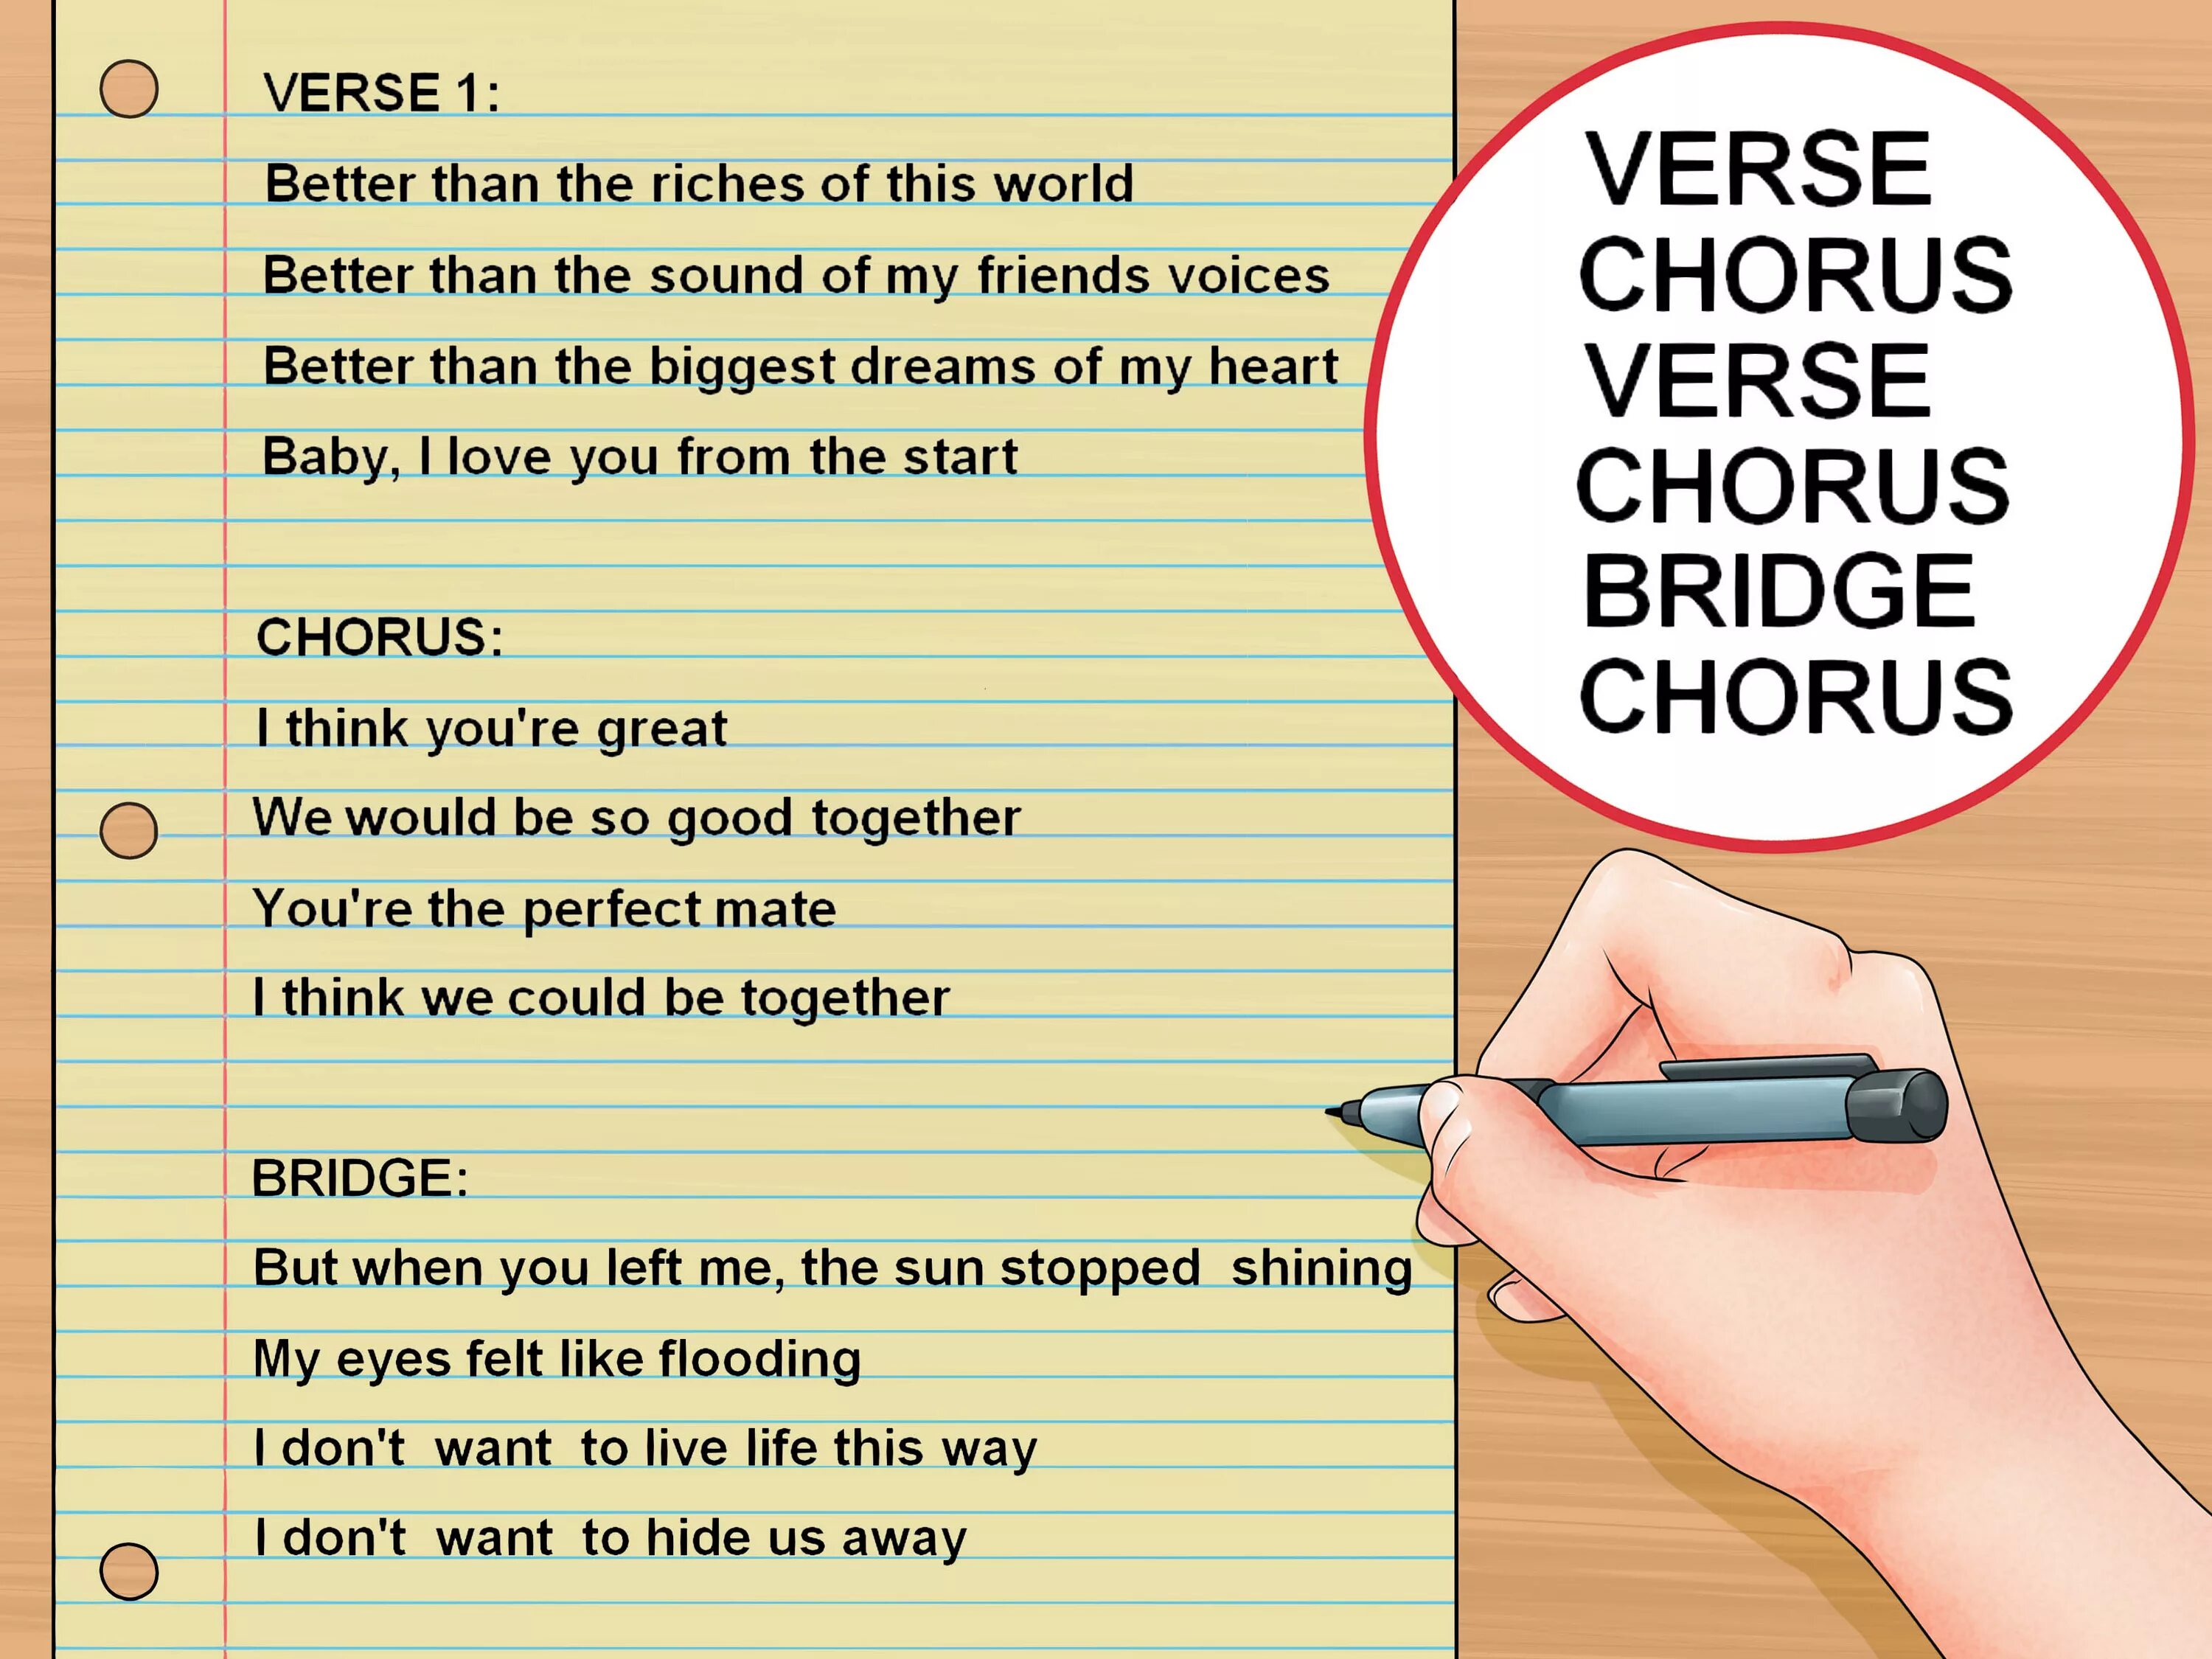 How to start writing. How to write a Song. How to write good. Writing Verses. How to write a pre Chorus.